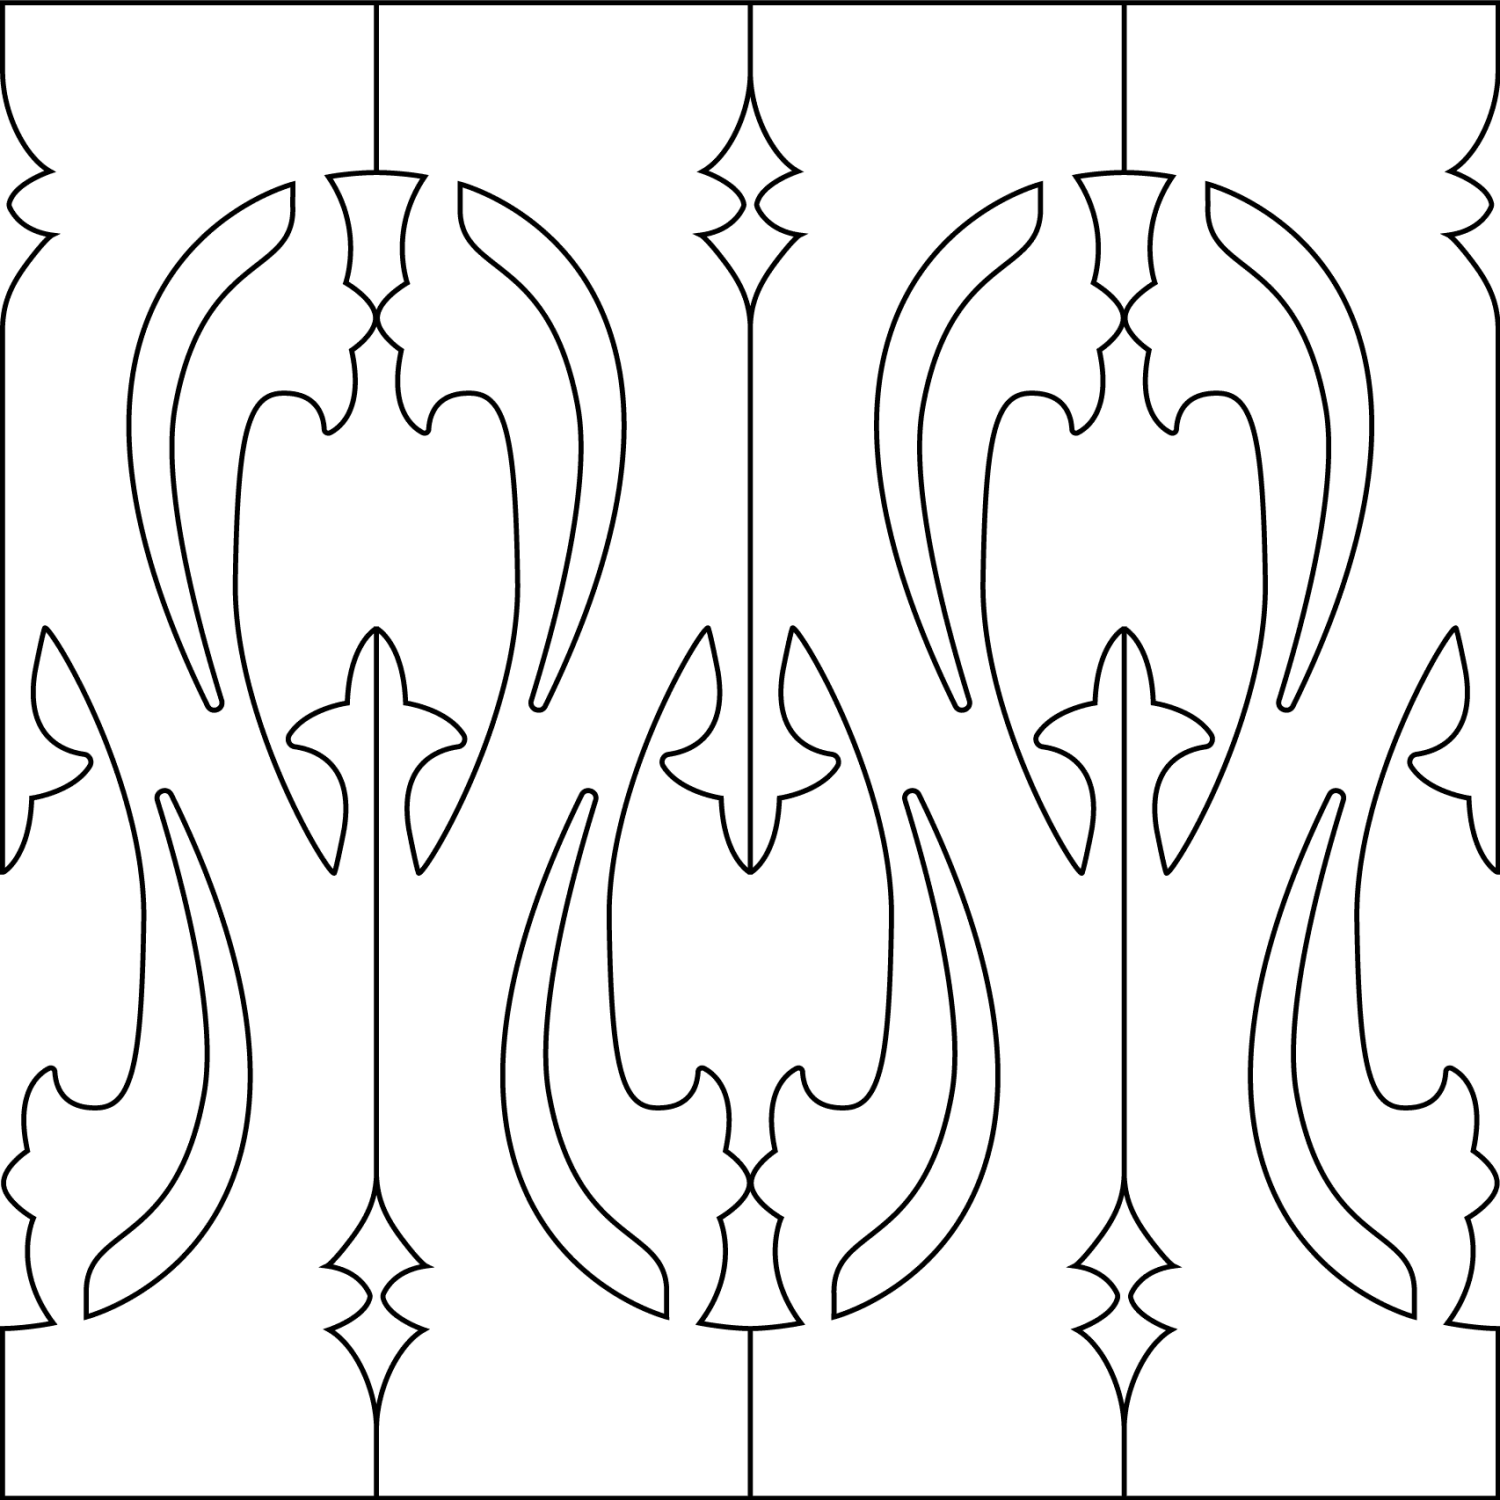 Baluster 052 - The drawing shows 4 Decorative victorian sawn balusters & pickets together